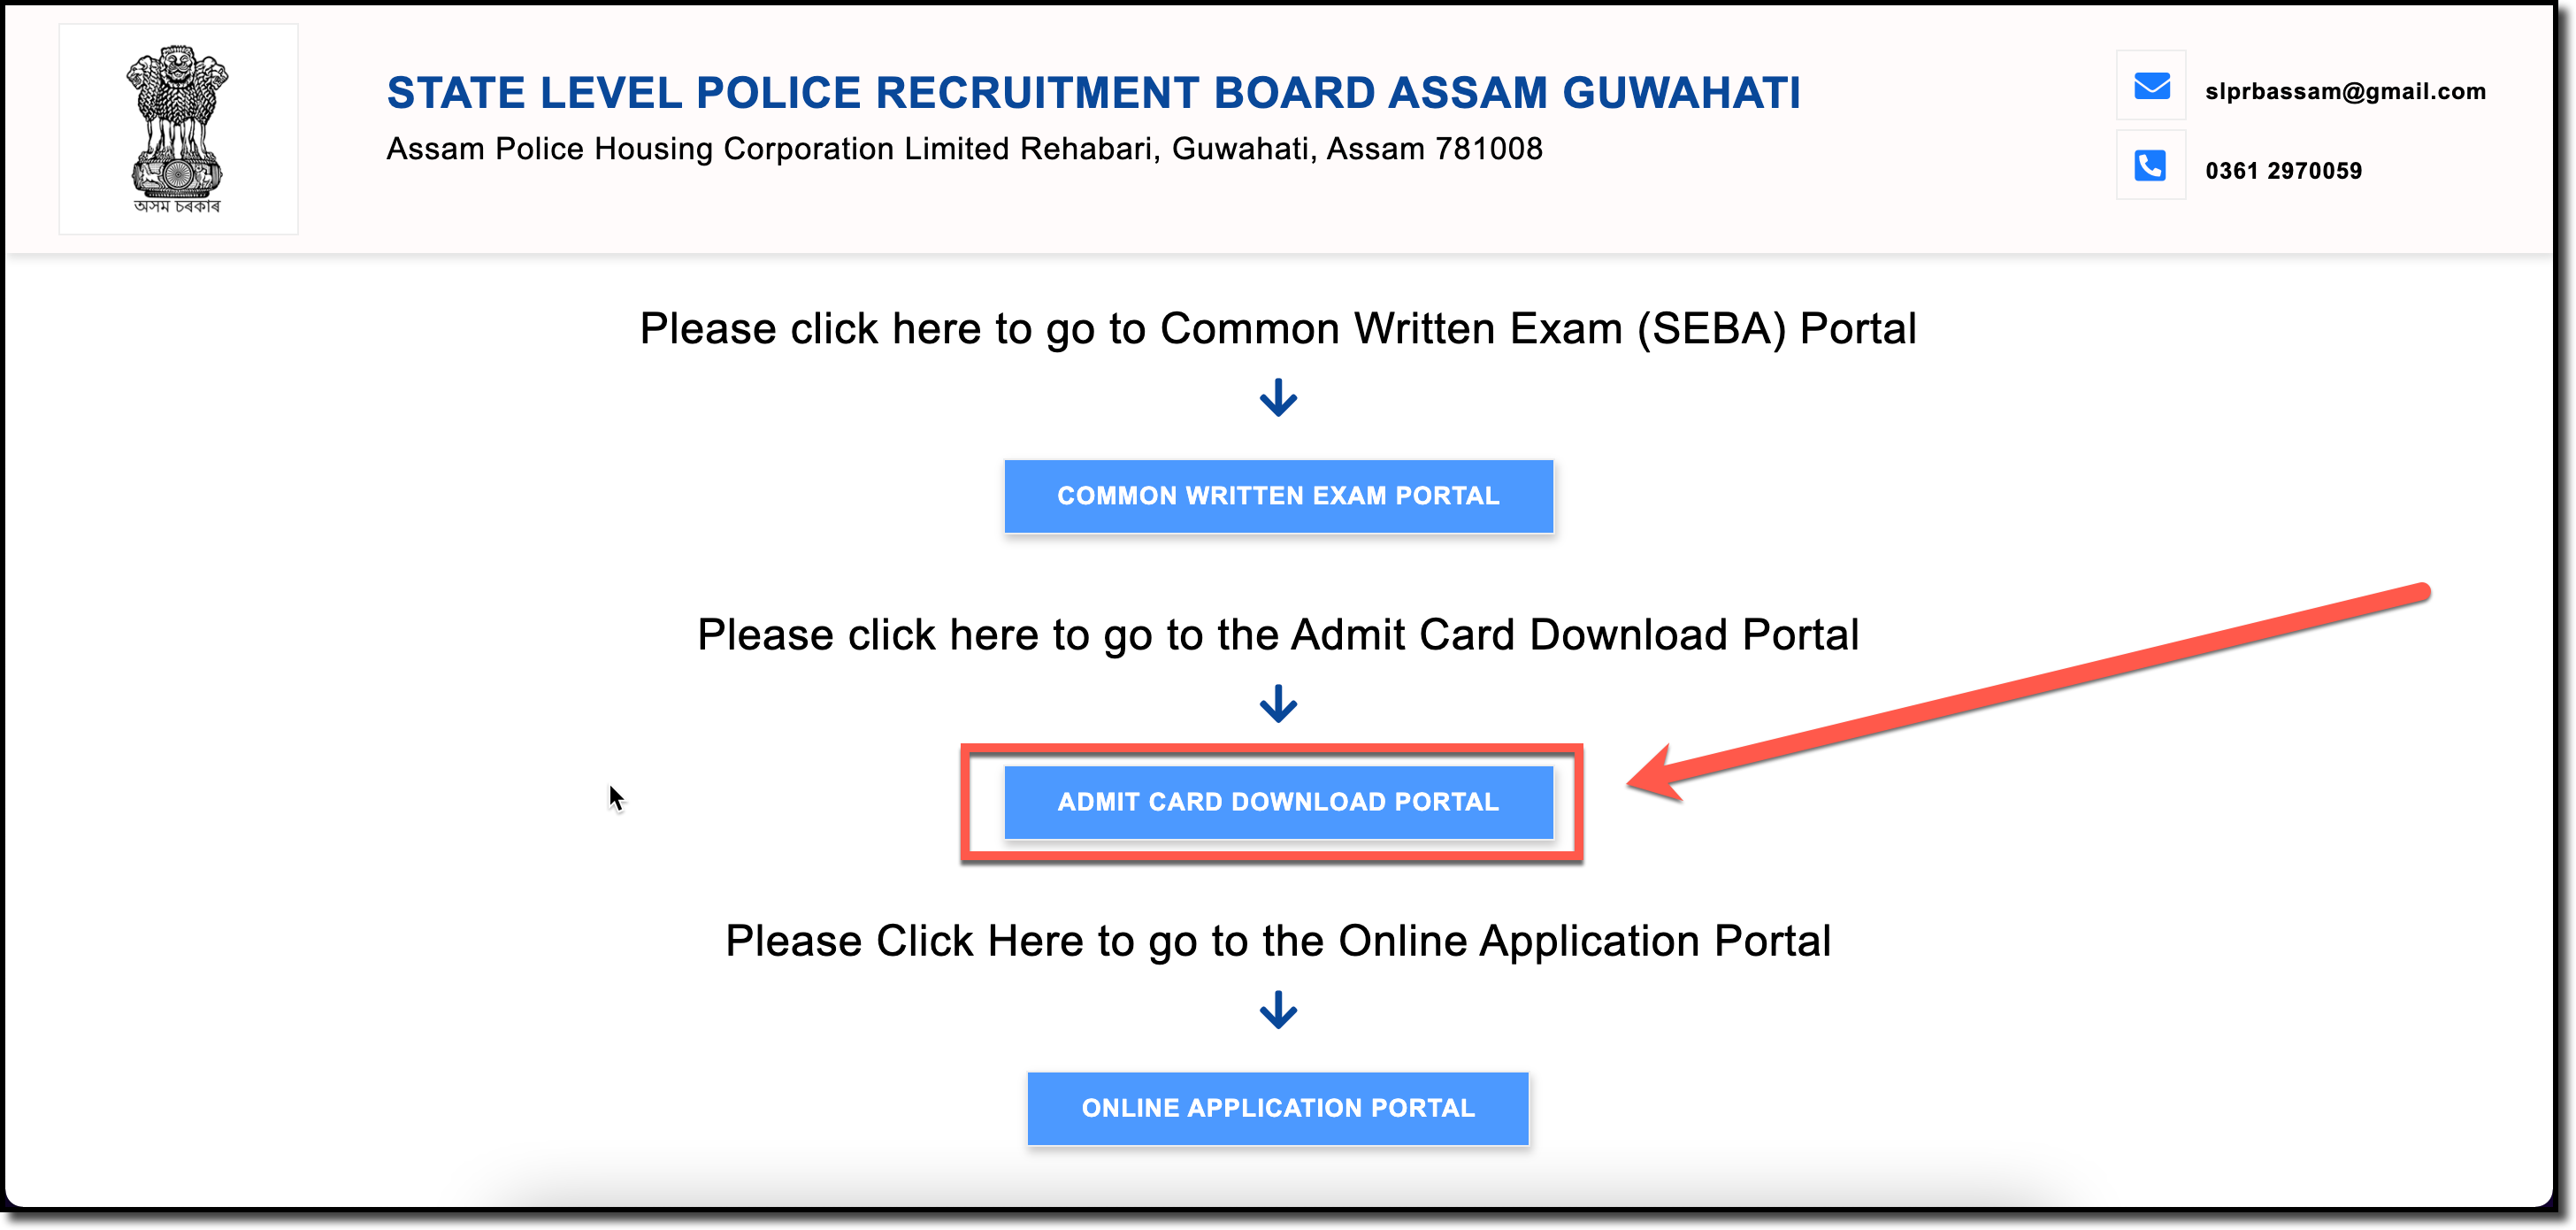 Click on Admit Card Download Portal